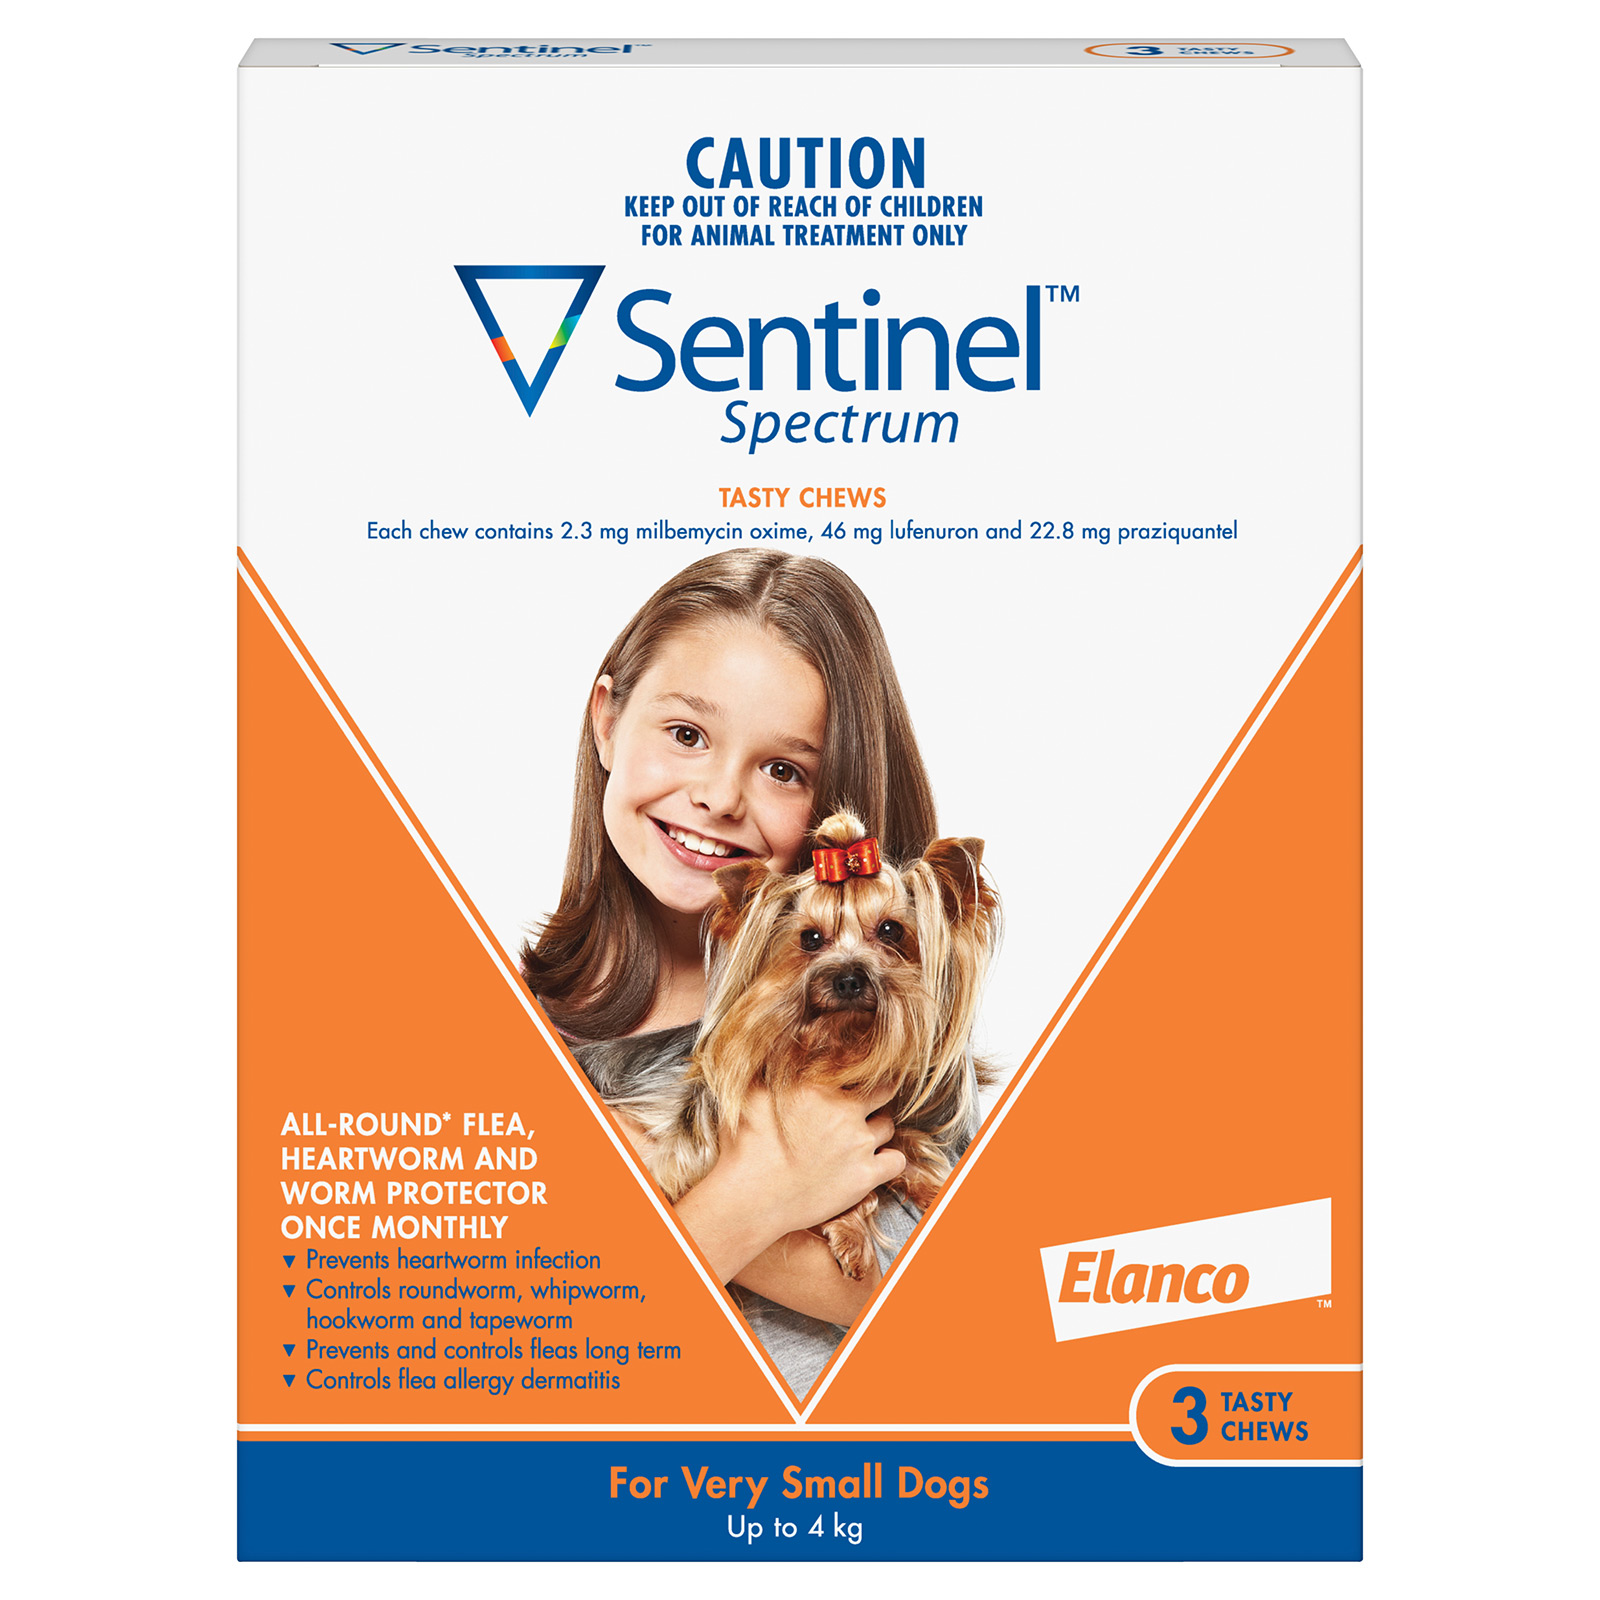 Sentinel Spectrum Chews For Very Small Dogs Up To 4Kg (Orange)